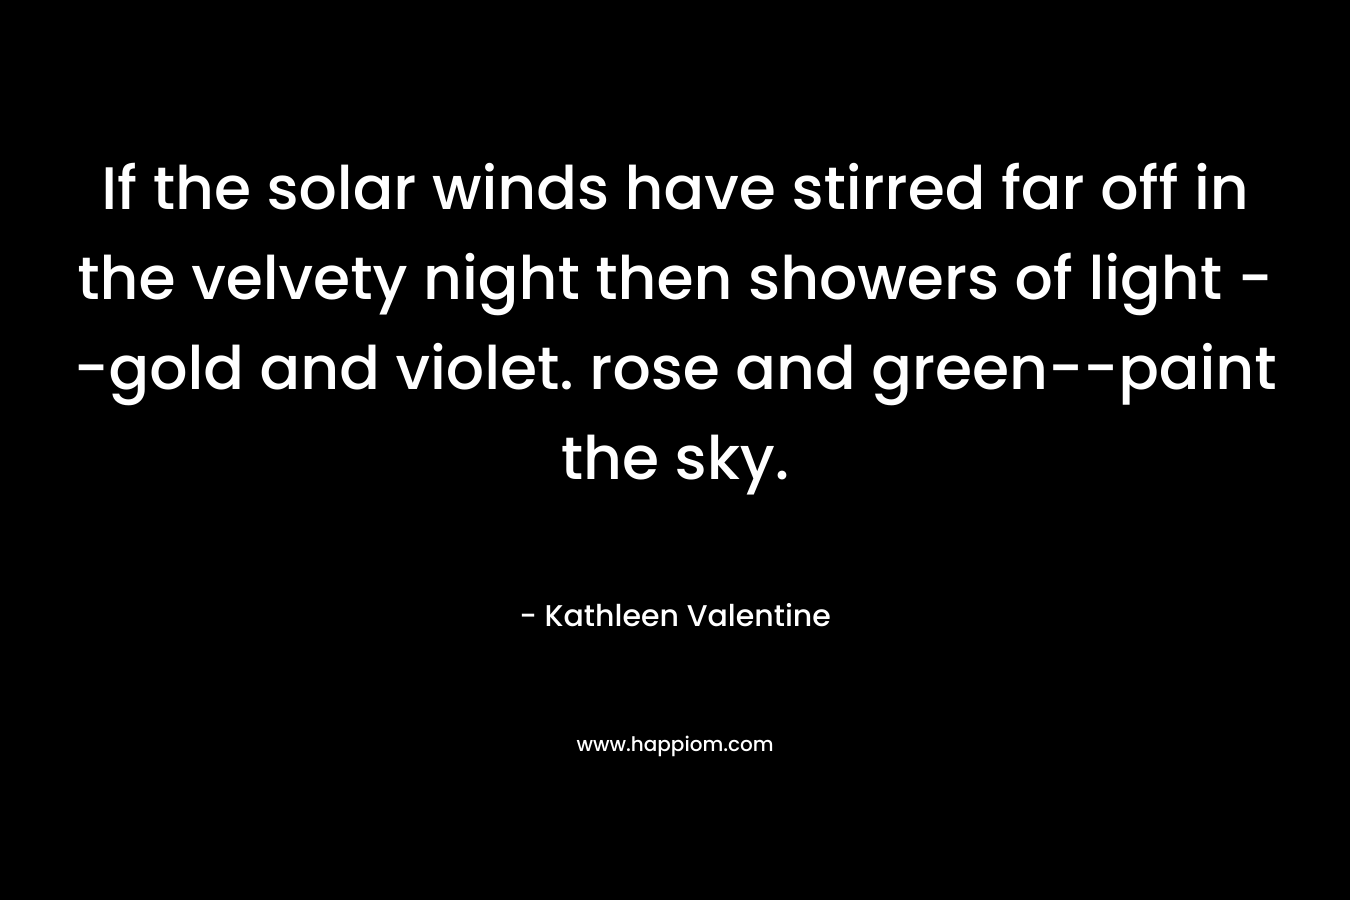 If the solar winds have stirred far off in the velvety night then showers of light --gold and violet. rose and green--paint the sky.